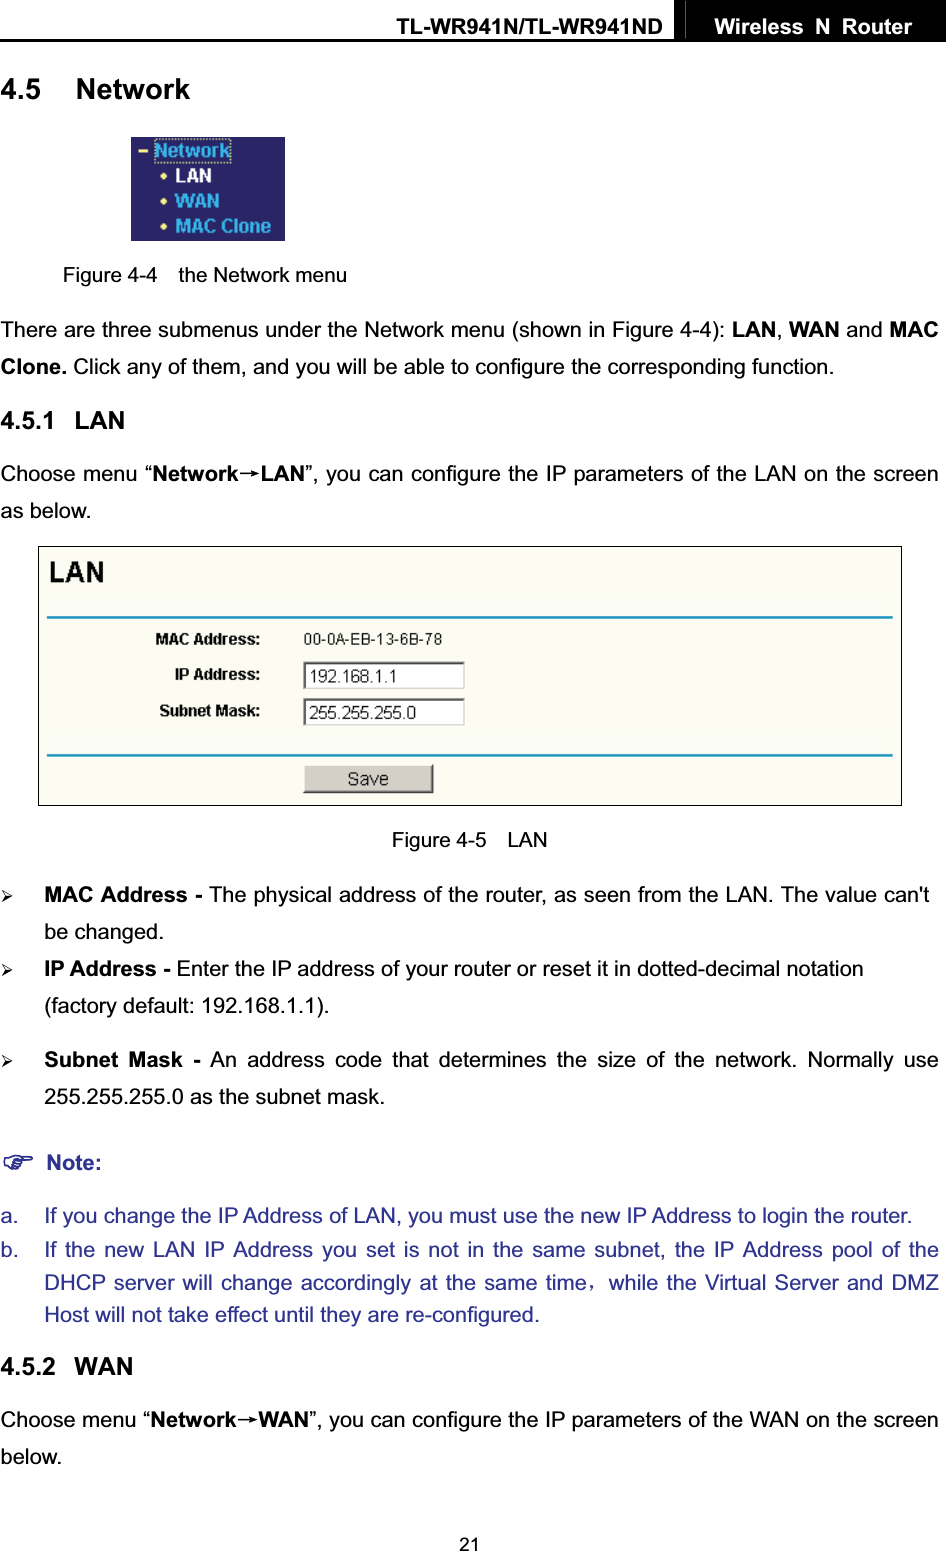 TL-WR941N/TL-WR941ND  Wireless N Router  214.5 NetworkFigure 4-4  the Network menu There are three submenus under the Network menu (shown in Figure 4-4): LAN,WAN and MACClone. Click any of them, and you will be able to configure the corresponding function.   4.5.1 LANChoose menu “NetworkėLAN”, you can configure the IP parameters of the LAN on the screen as below. Figure 4-5  LAN ¾MAC Address - The physical address of the router, as seen from the LAN. The value can&apos;t be changed. ¾IP Address - Enter the IP address of your router or reset it in dotted-decimal notation (factory default: 192.168.1.1). ¾Subnet Mask - An address code that determines the size of the network. Normally use 255.255.255.0 as the subnet mask.   )Note:a.  If you change the IP Address of LAN, you must use the new IP Address to login the router.   b.  If the new LAN IP Address you set is not in the same subnet, the IP Address pool of the DHCP server will change accordingly at the same timeˈwhile the Virtual Server and DMZ Host will not take effect until they are re-configured. 4.5.2 WANChoose menu “NetworkėWAN”, you can configure the IP parameters of the WAN on the screen below. 